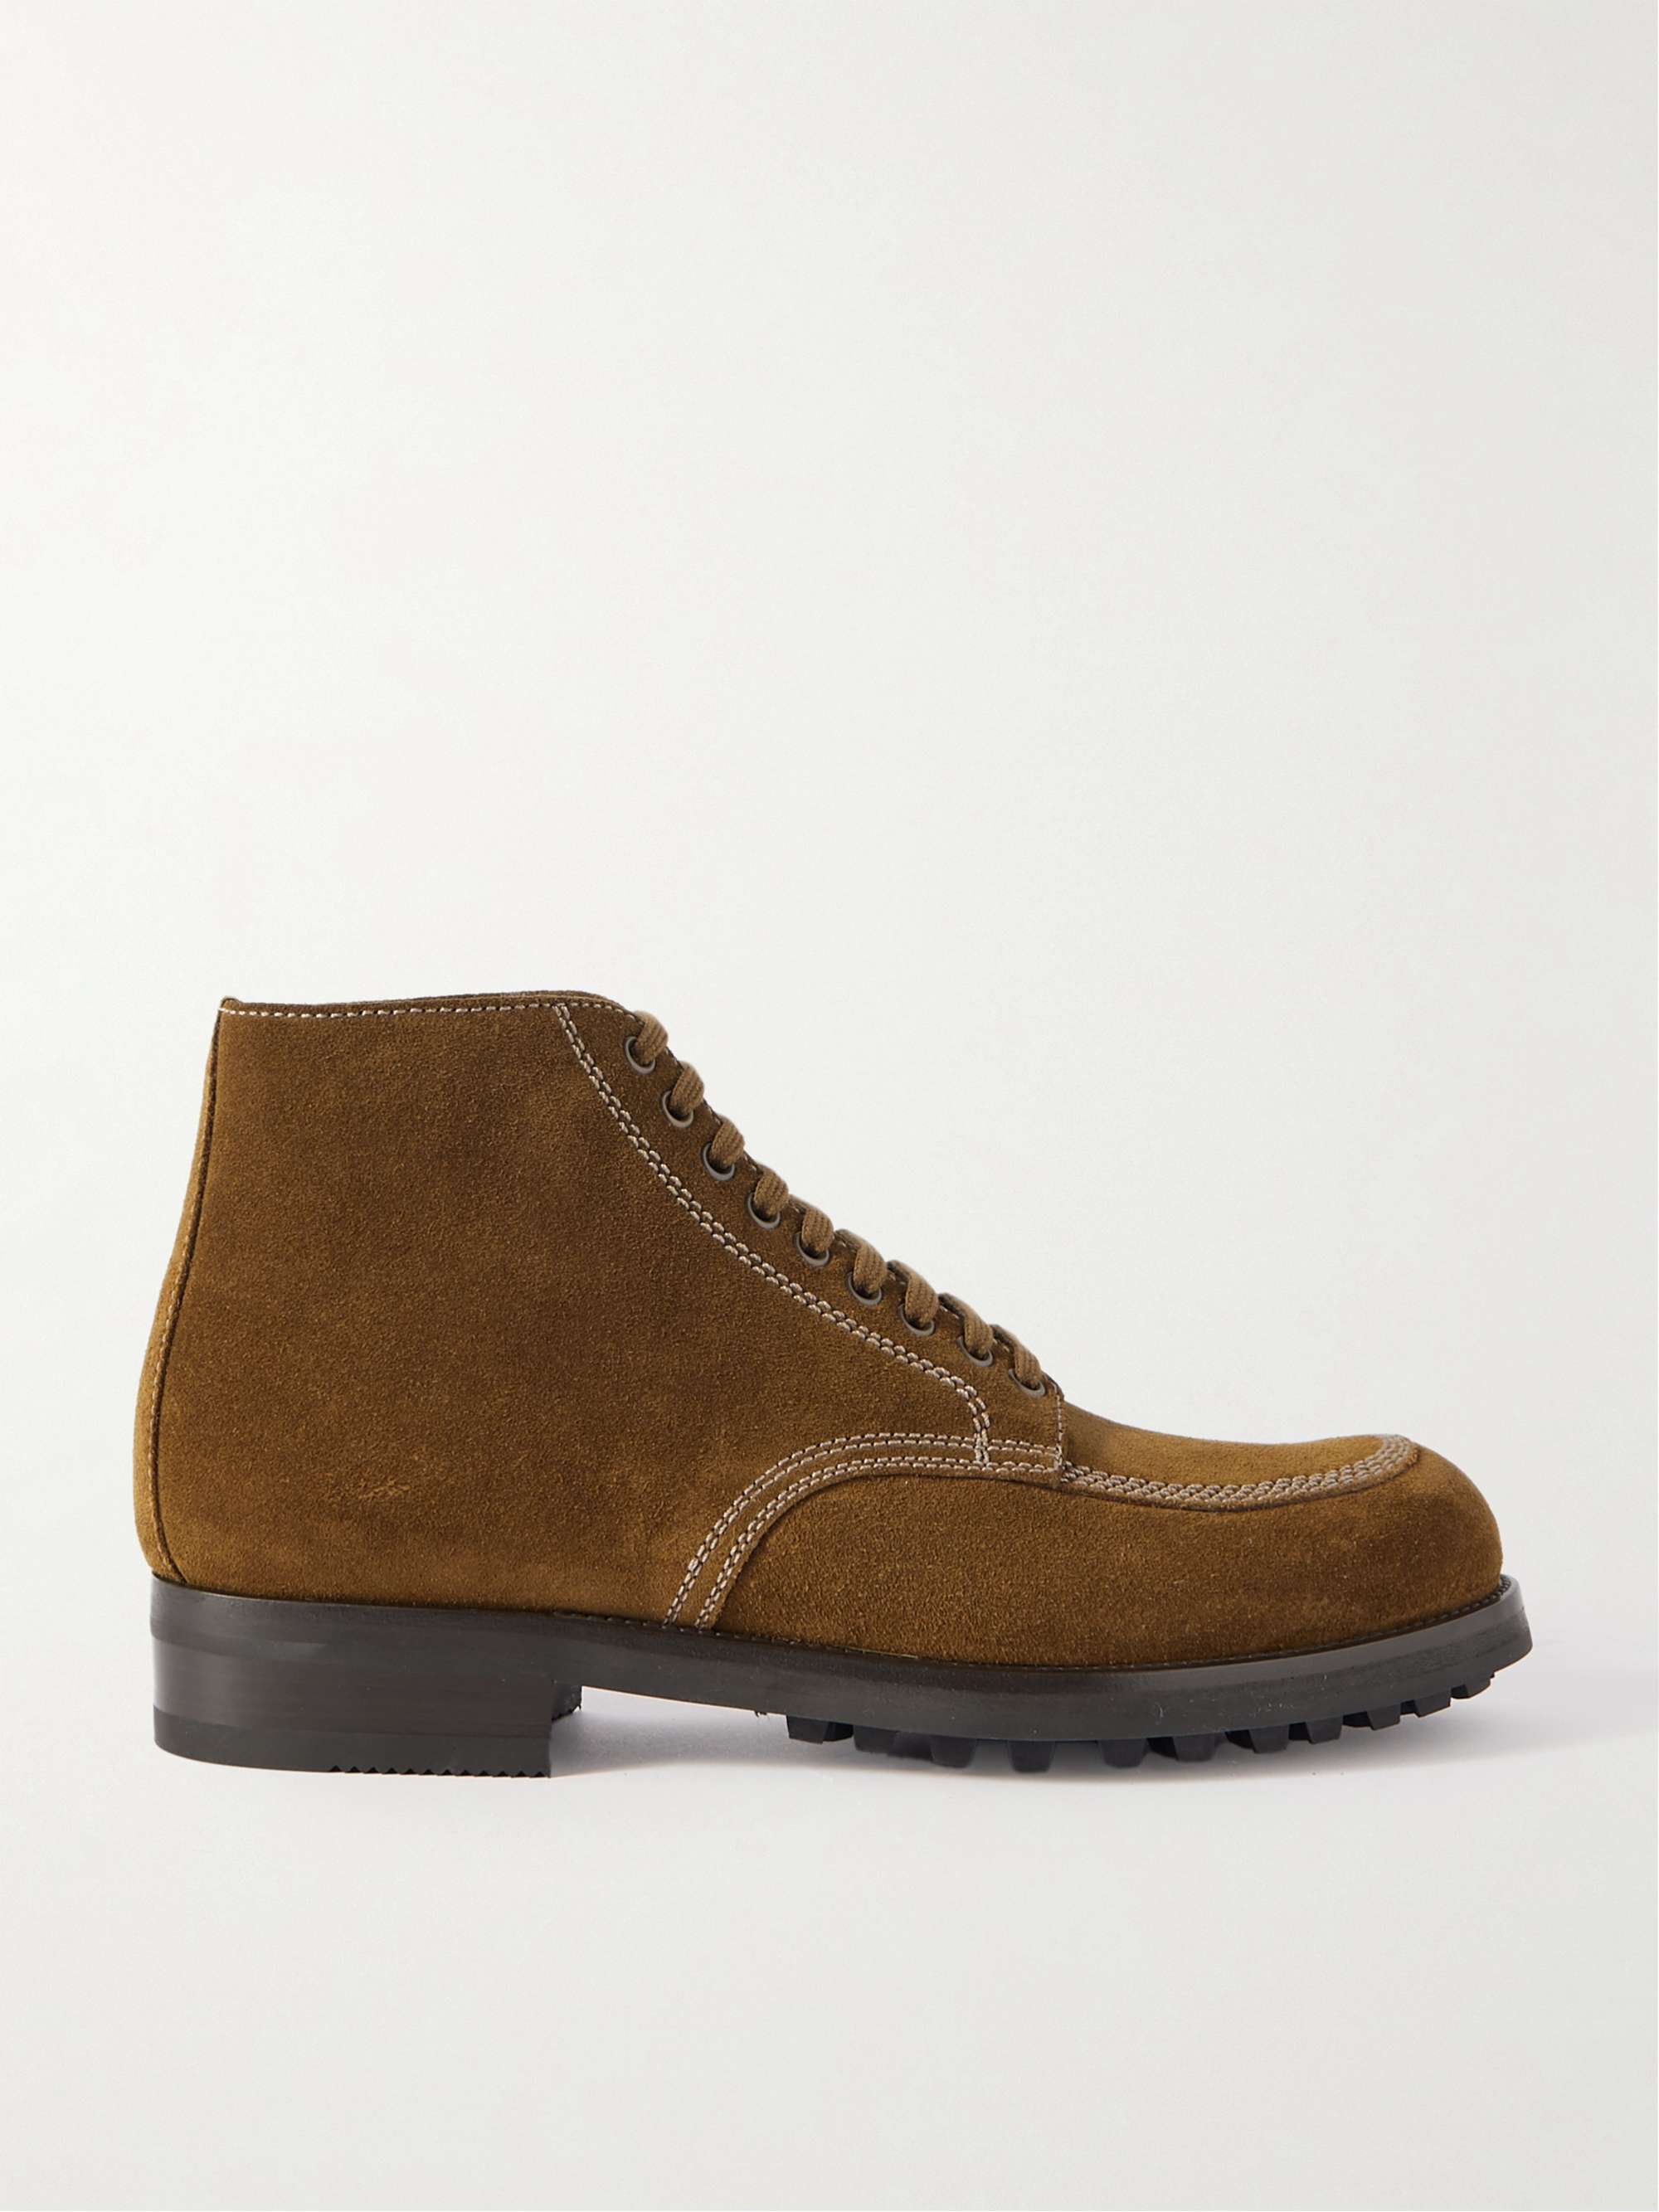 TOM FORD Bodiam Suede Lace-Up Boots